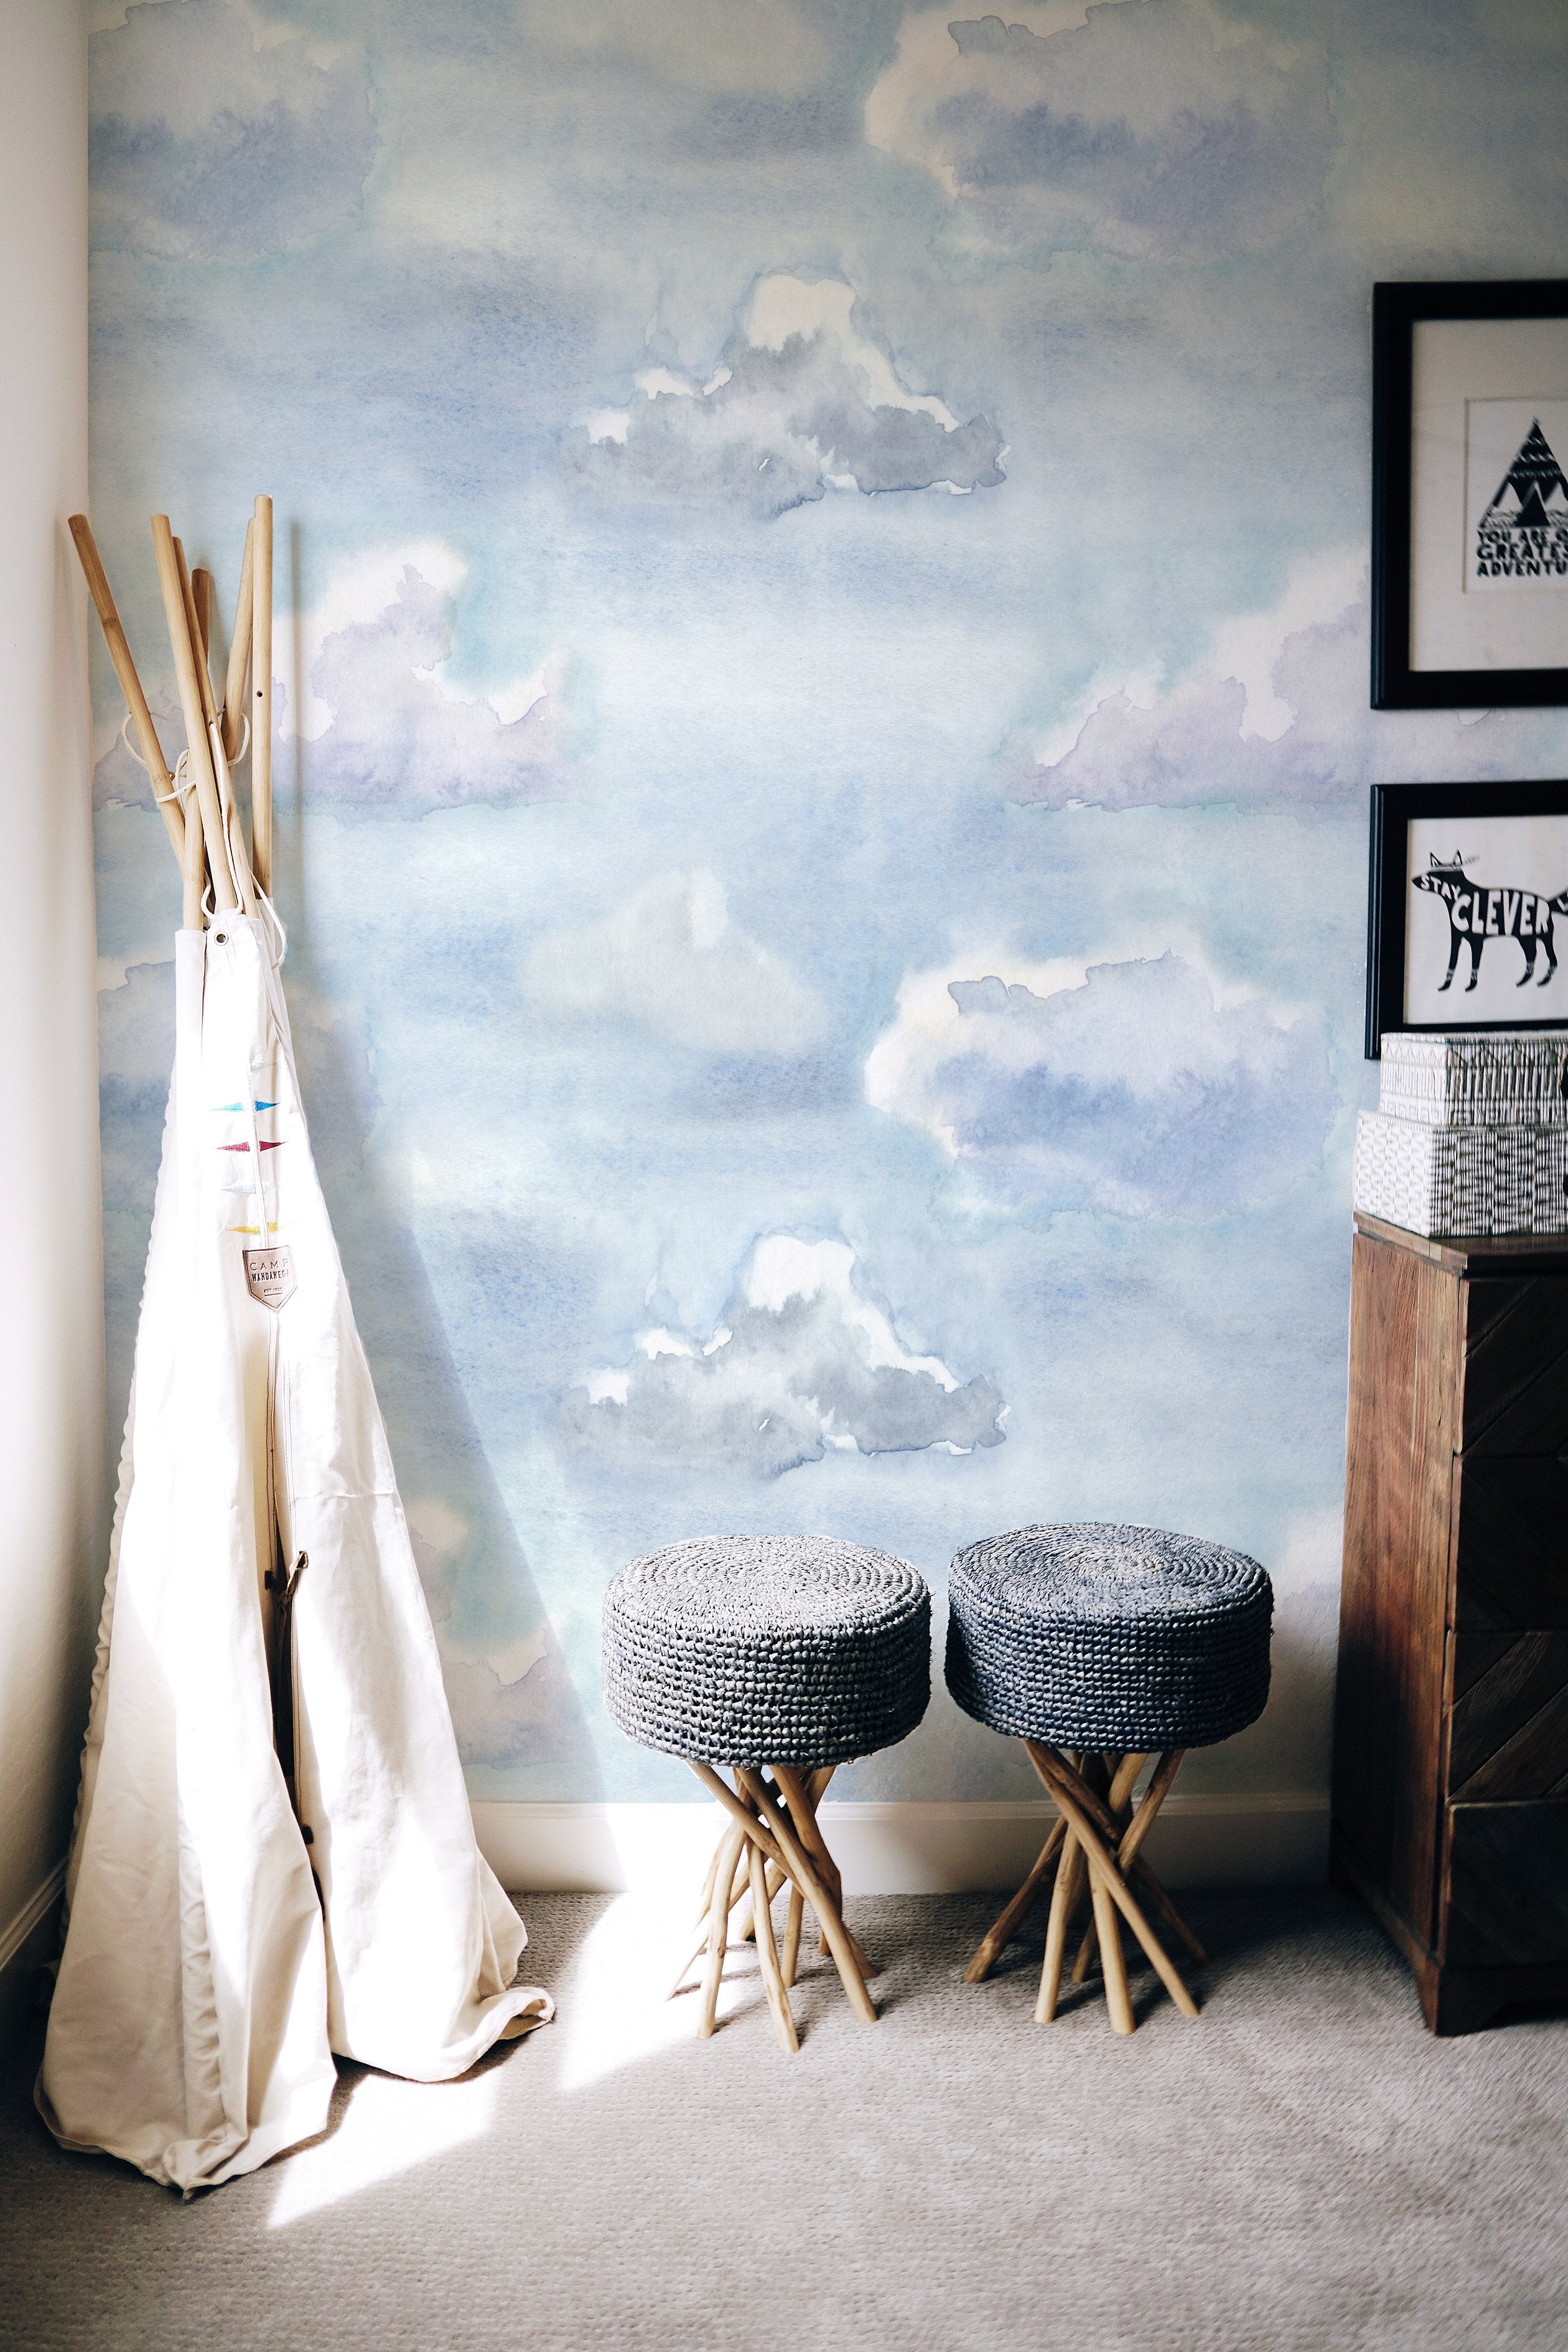  children's corner is transformed into a dreamy space with the "Watercolour Cloud and Skies" wallpaper. A teepee tent, woven stools, and playful decor create an imaginative play area, inspired by the tranquil, cloud-filled sky design of the wallpaper.